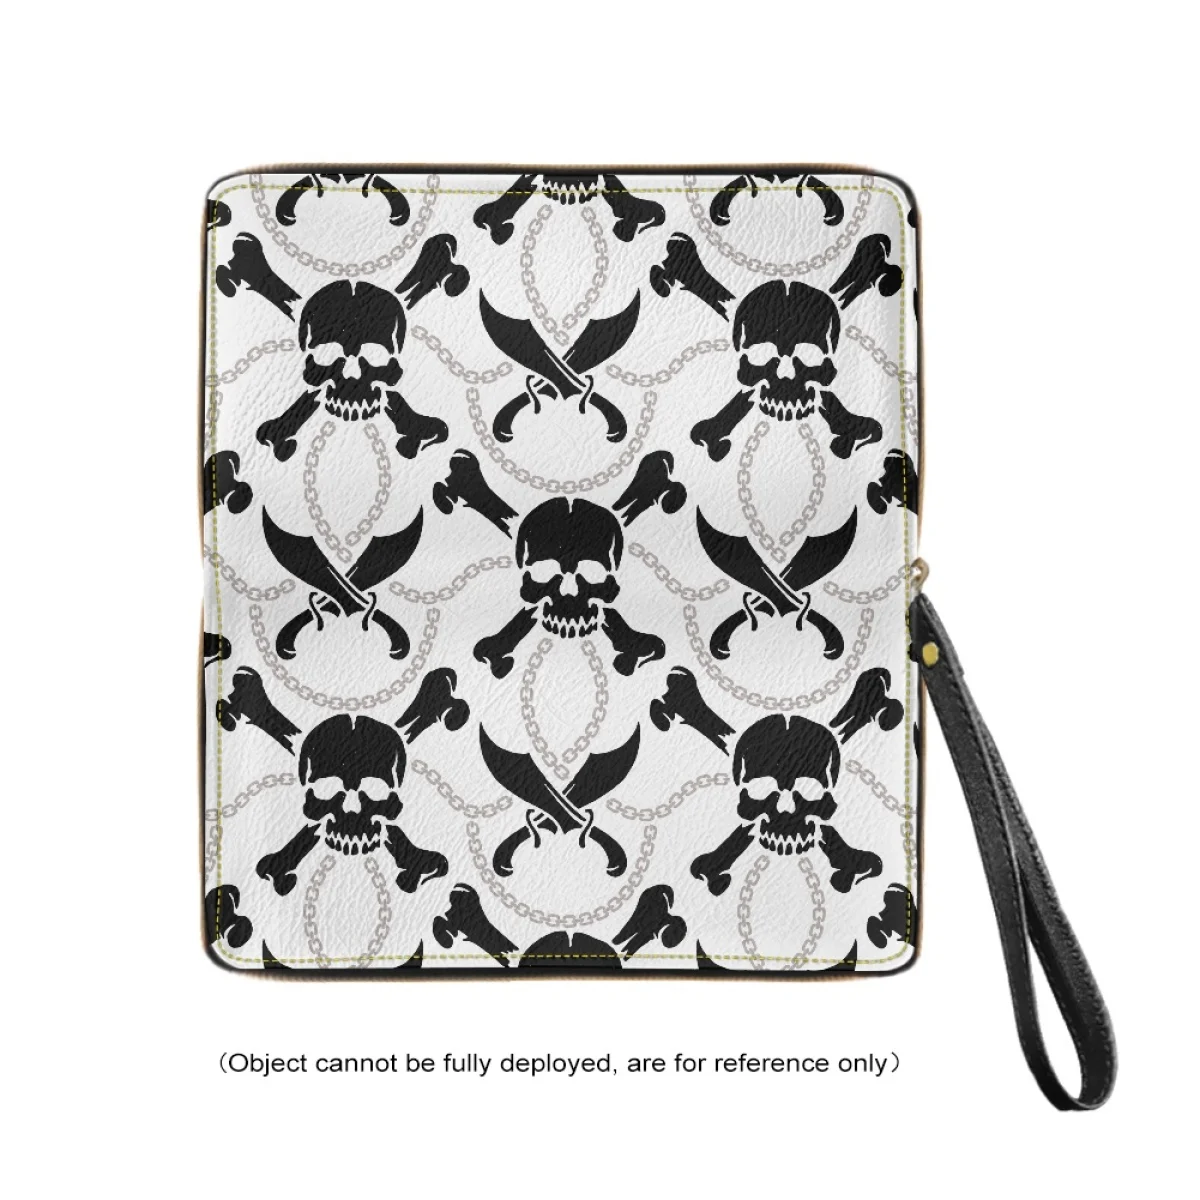 Skull Print Clutch Wallet For Women Luxury Brand Wallet Pu Leather Lightweight With StrapSlim Wallet Carteras Para Mujer